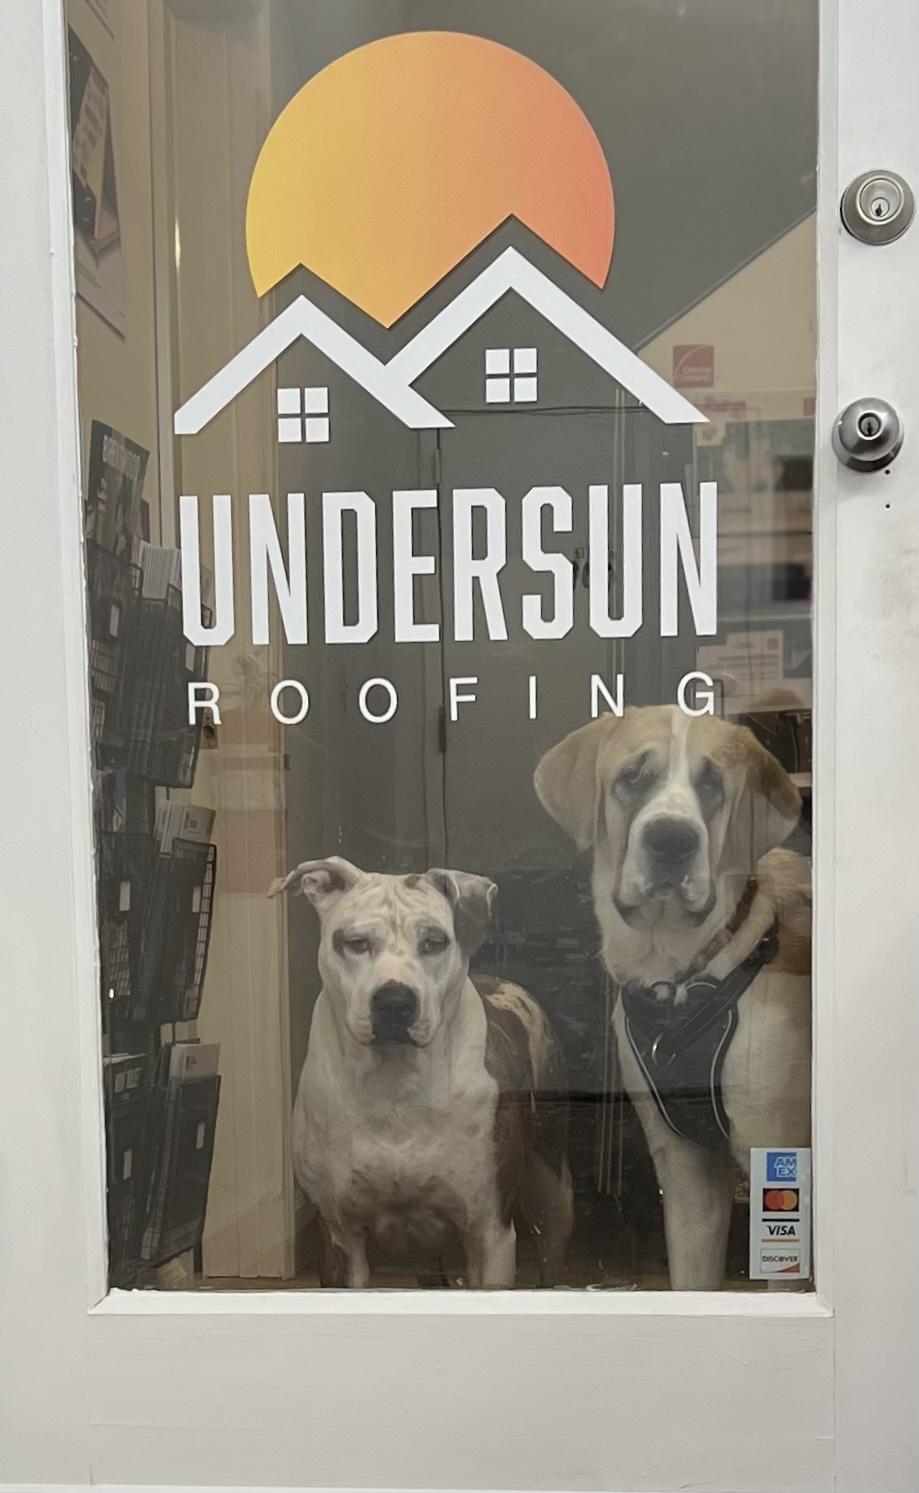 Undersun Roofing of Brentwood, Tennessee